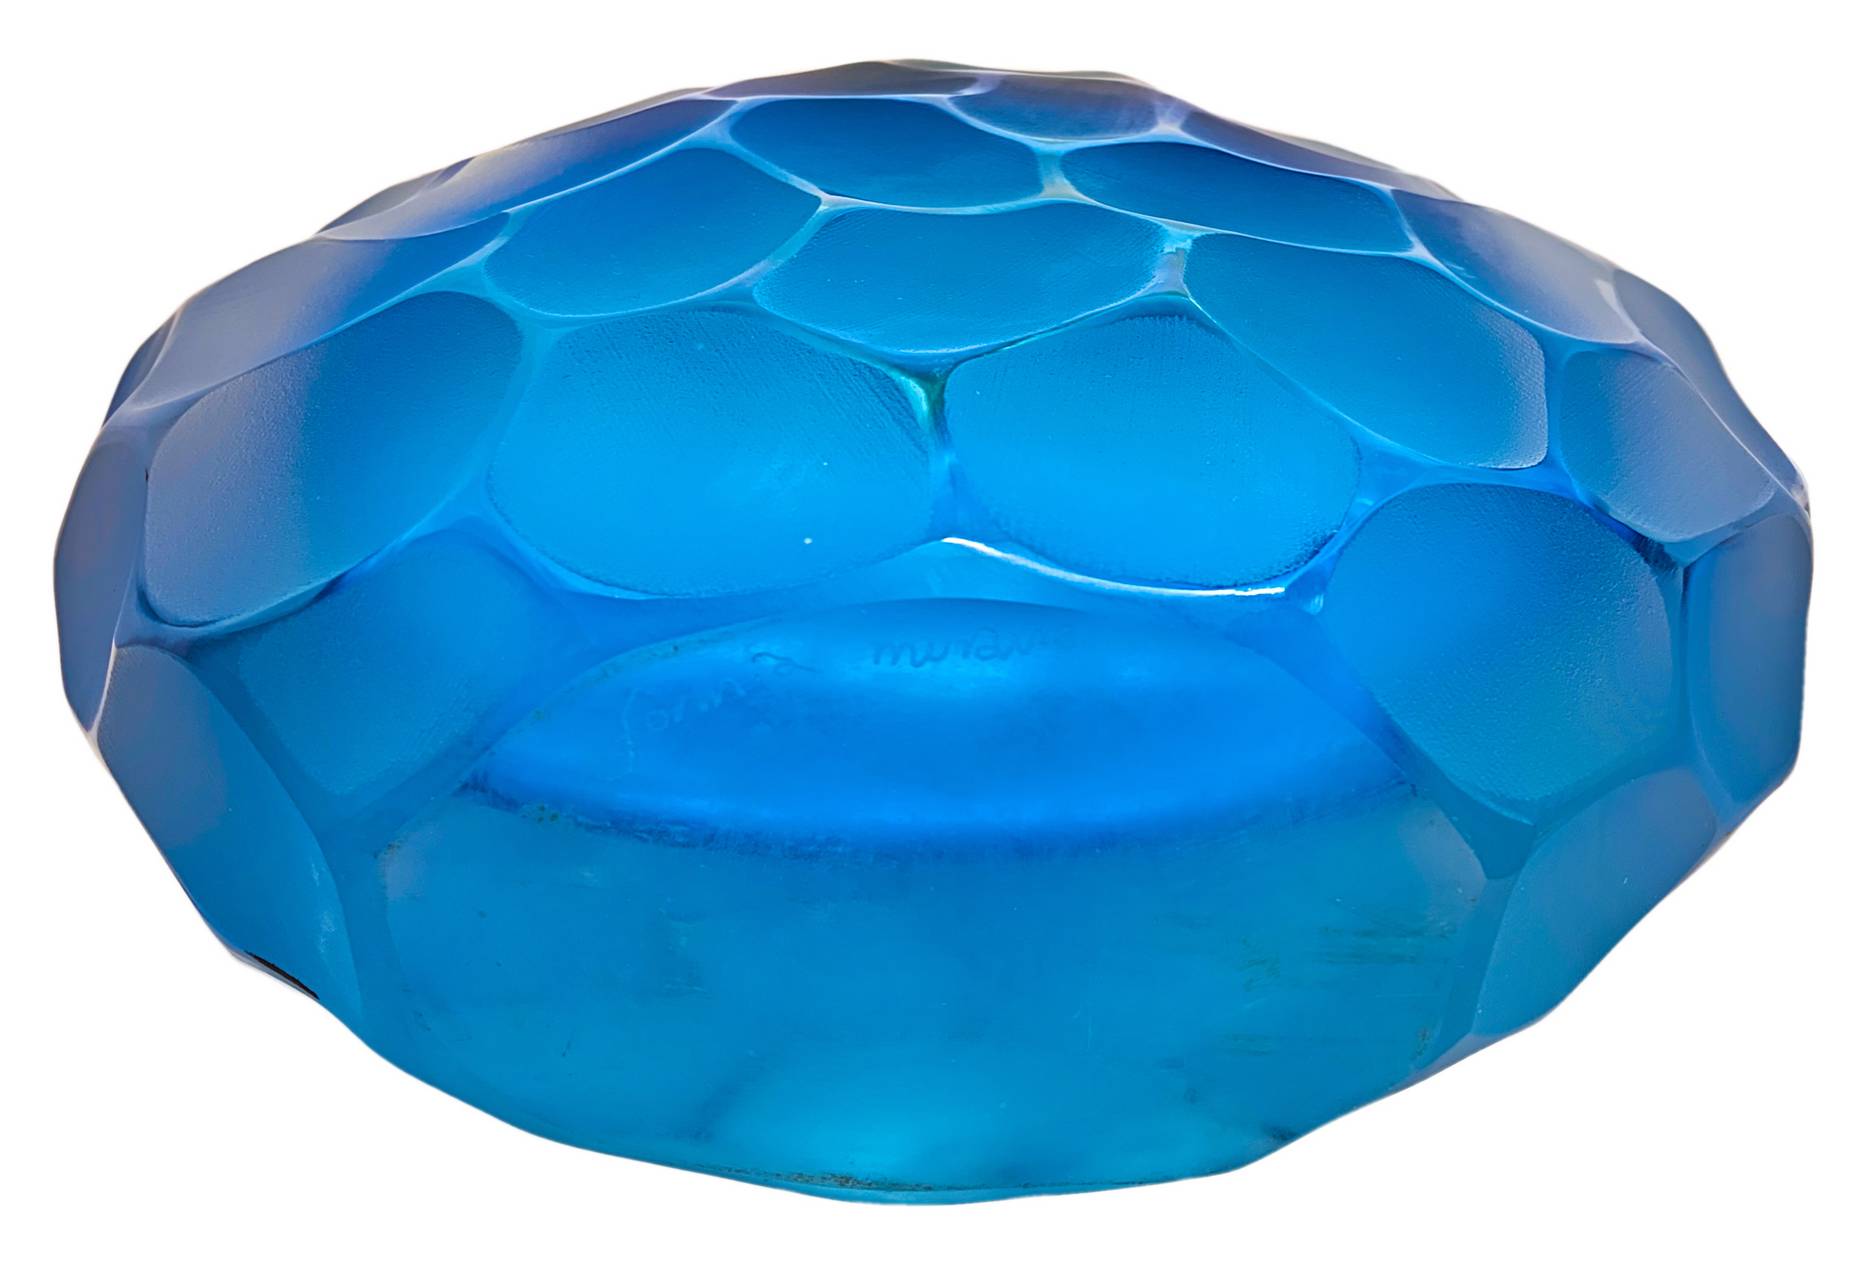 Glass jar submerged globular form in the blue and blue tones, grinded surface and veiled. Murano Gla - Image 6 of 7